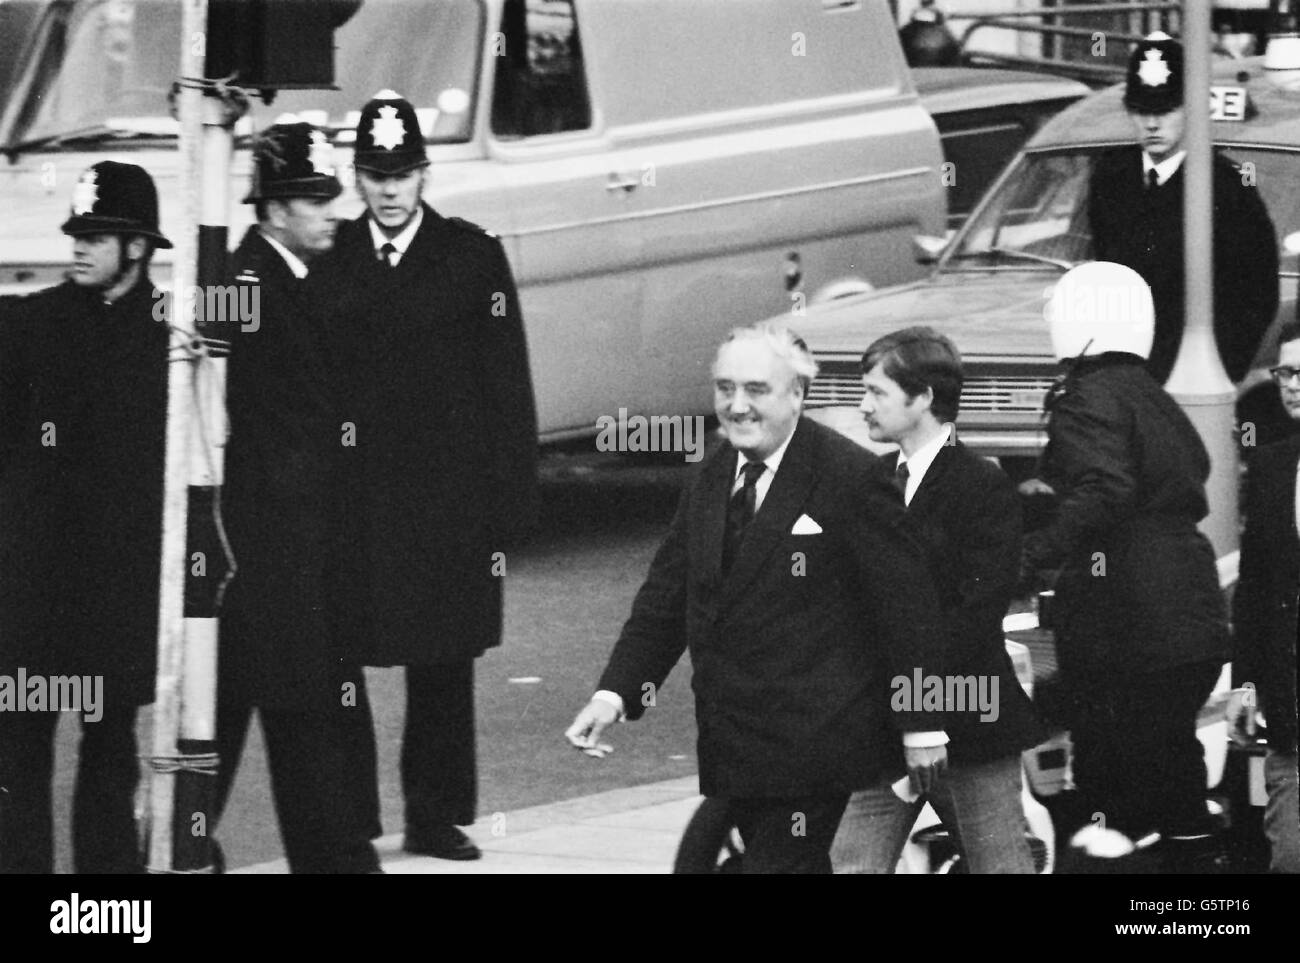 The Home Secretary, Mr William Whitelaw (centre, smiling) on his arrival at the end of the siege at the Iranian Embassy in London's Princess Gate. Stock Photo